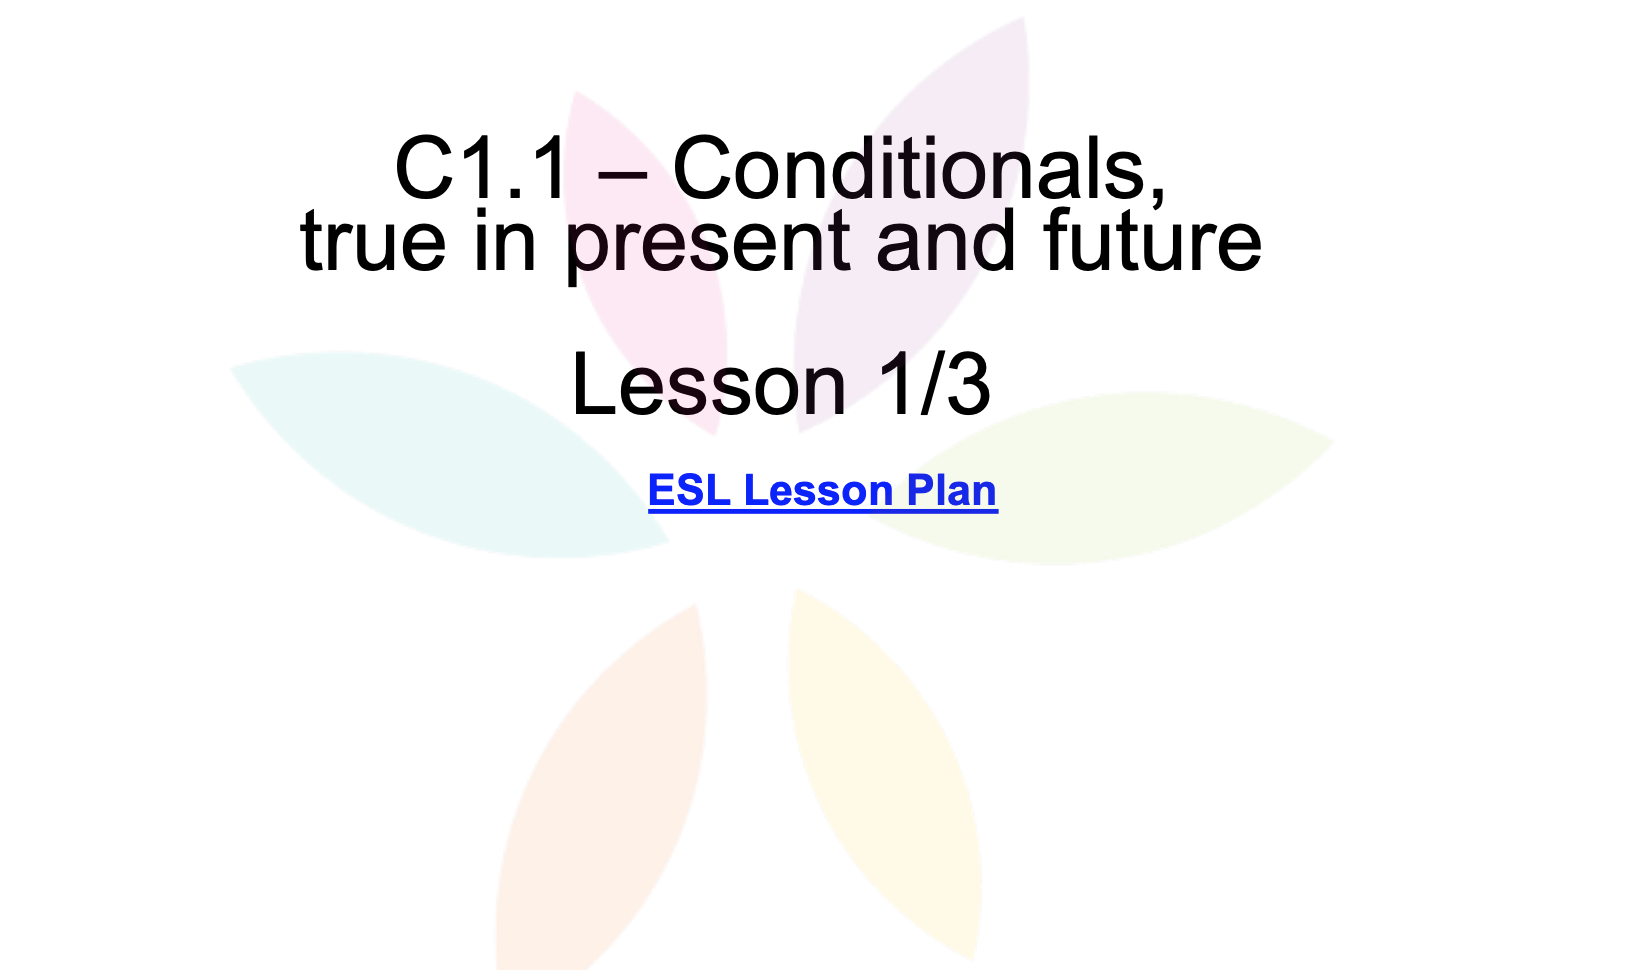 How To Teach Conditionals - True In The Present And Future - ESL Lesson Plan